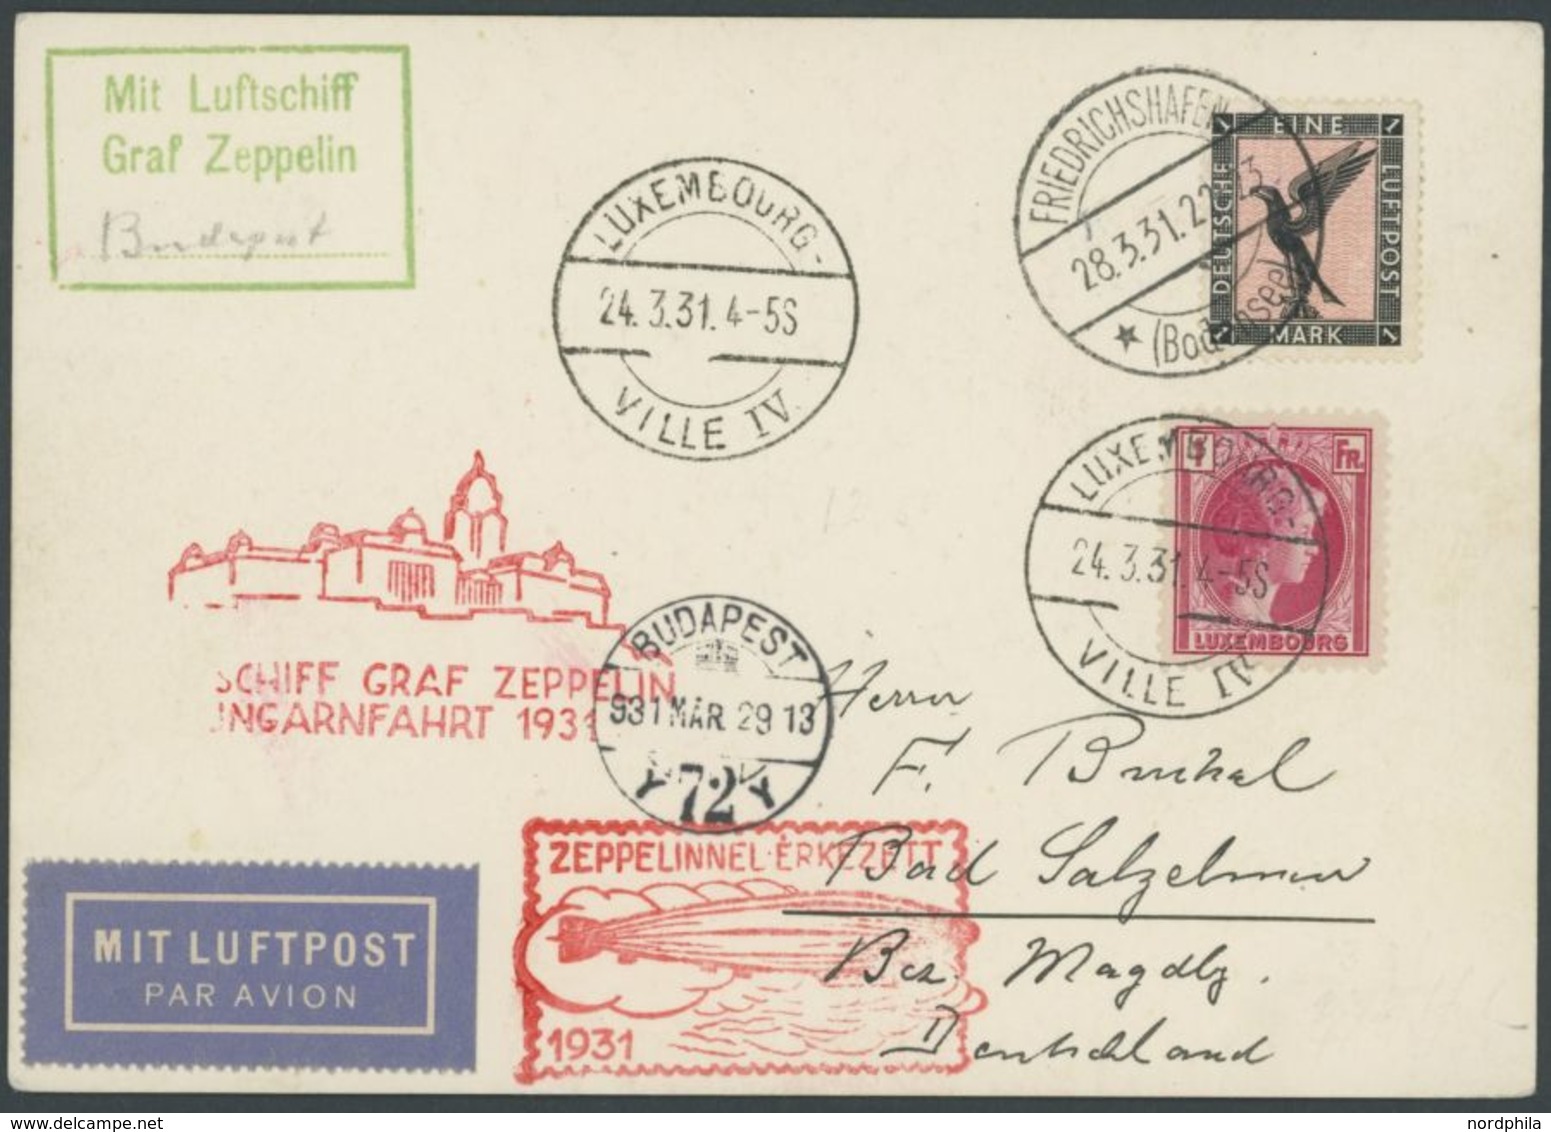 Luxemburg: 1931, Ungarnfahrt, Prachtkarte -> Automatically Generated Translation: Luxembourg: 1931, "Hungary Trip", Supe - Airmail & Zeppelin